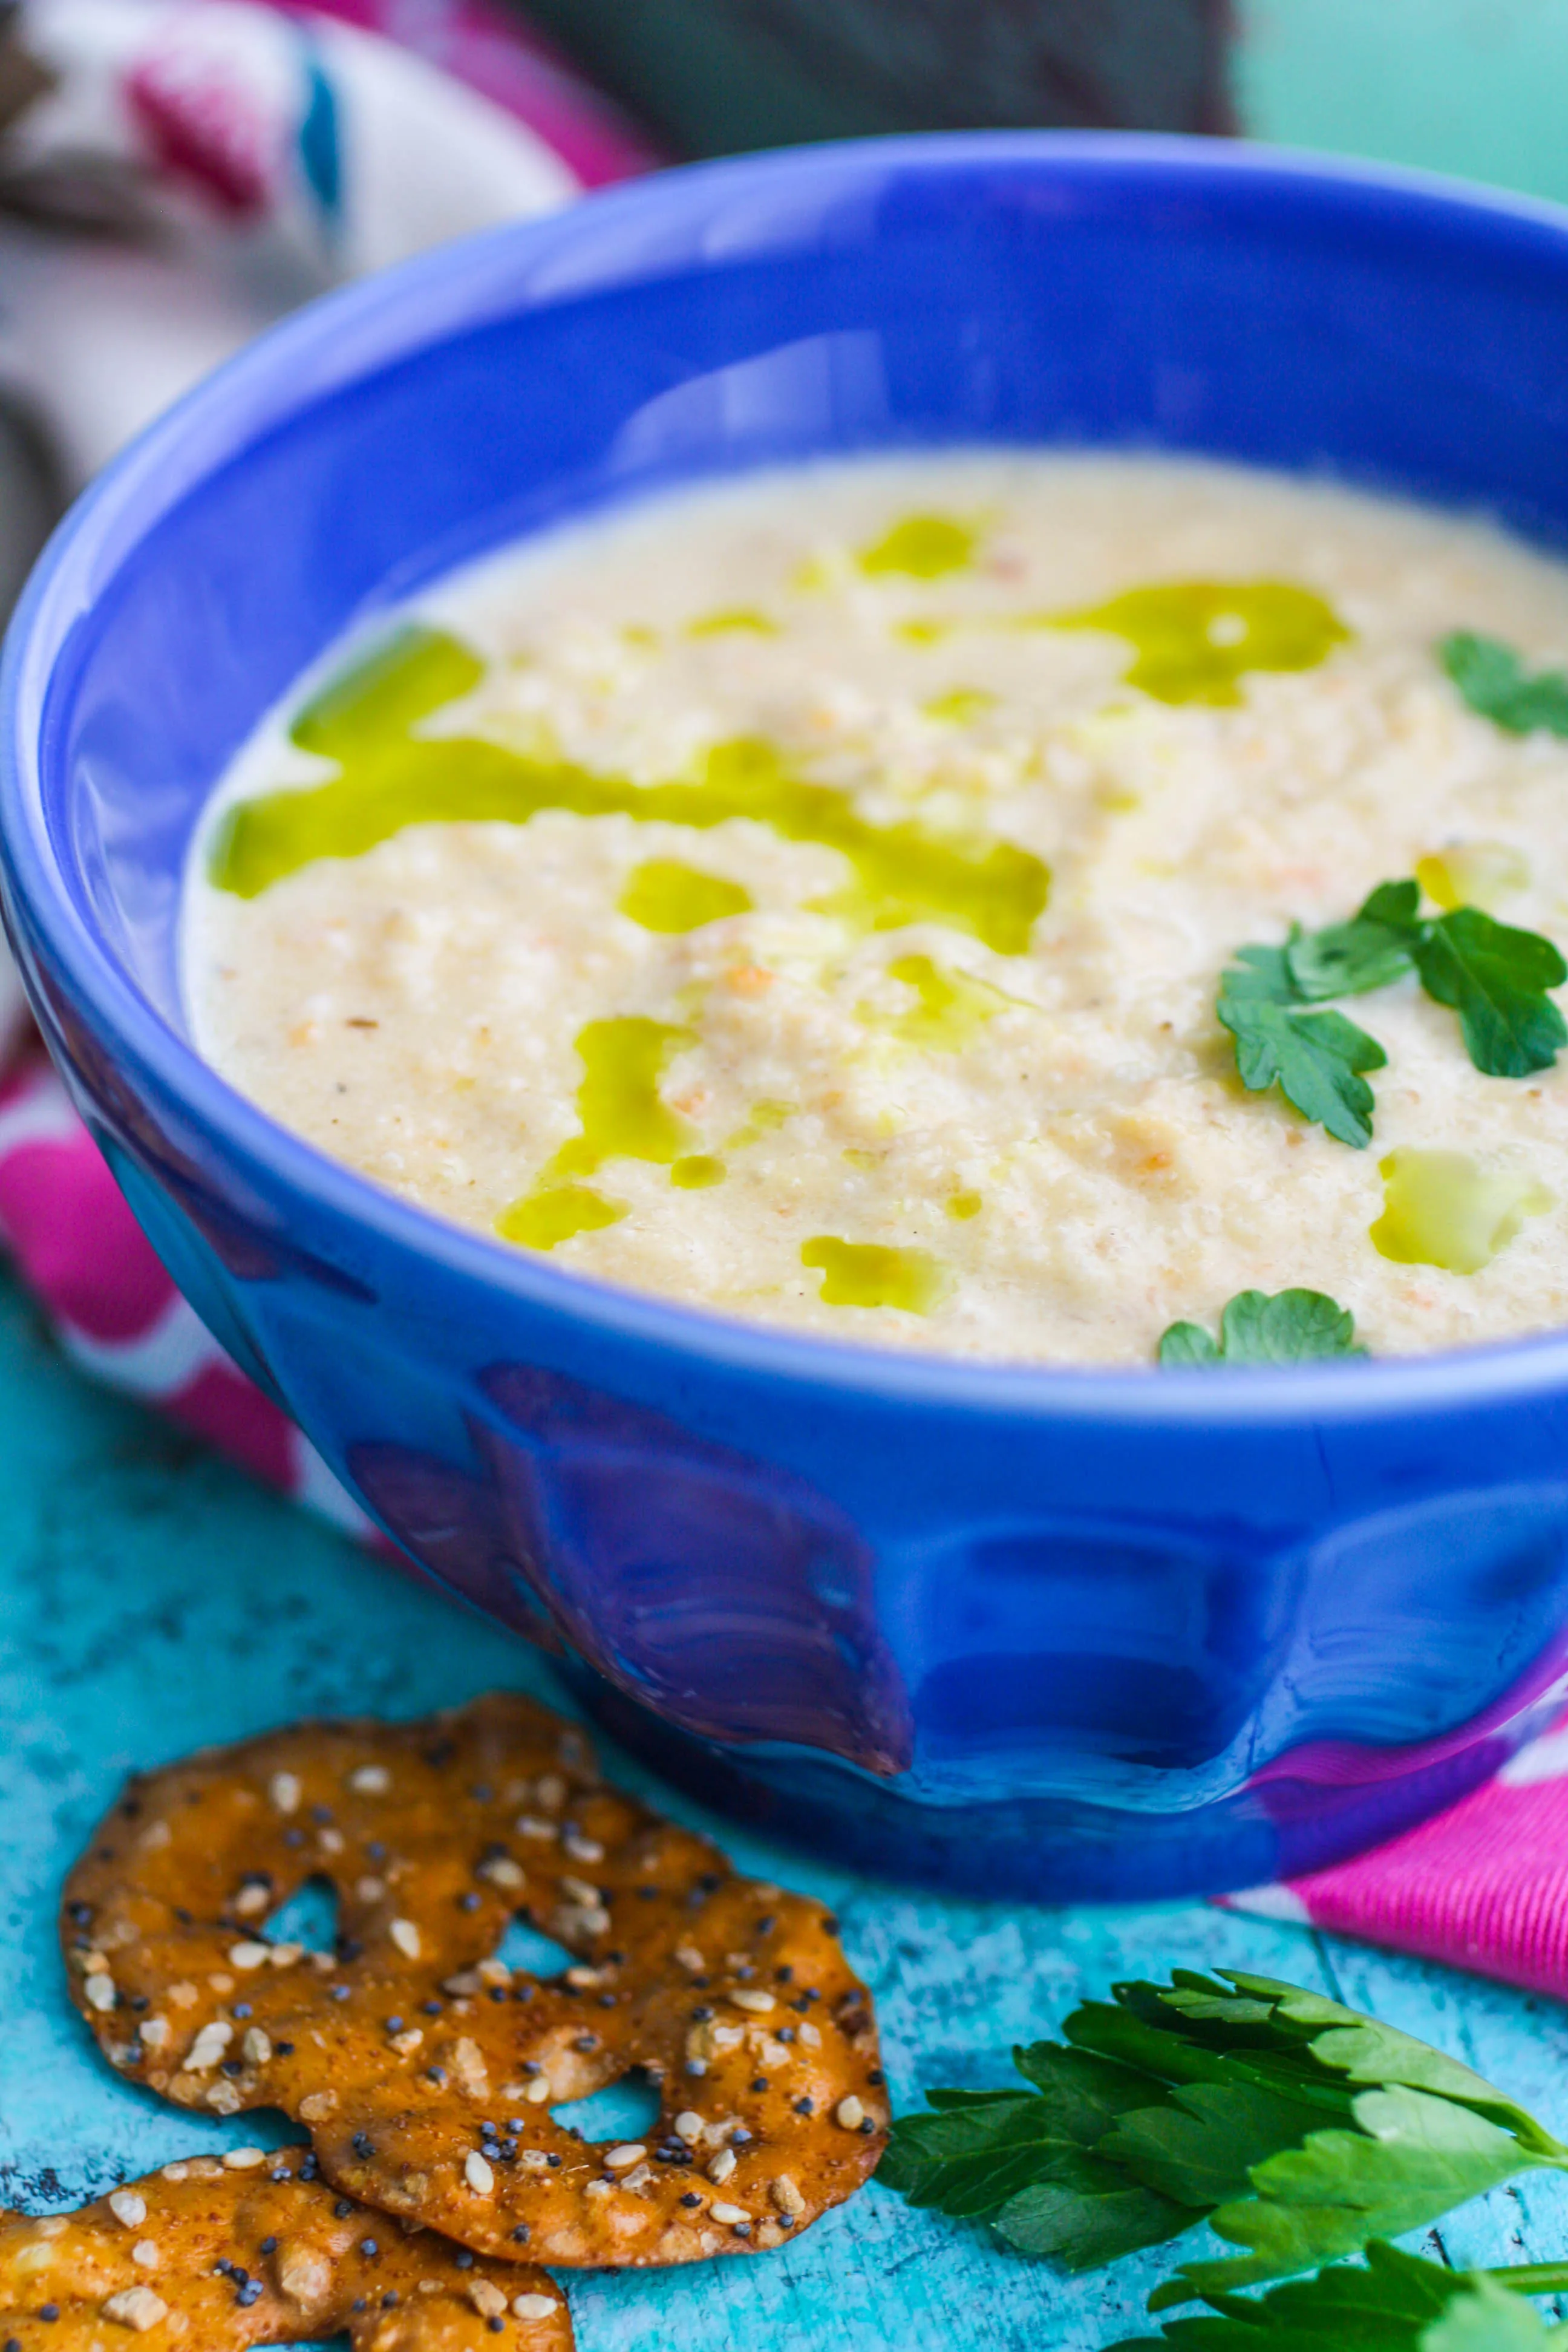 Creamy Roasted Cauliflower Soup with Parsley Oil is a tasty, hearty soup. You'll love Creamy Roasted Cauliflower Soup with Parsley Oil.